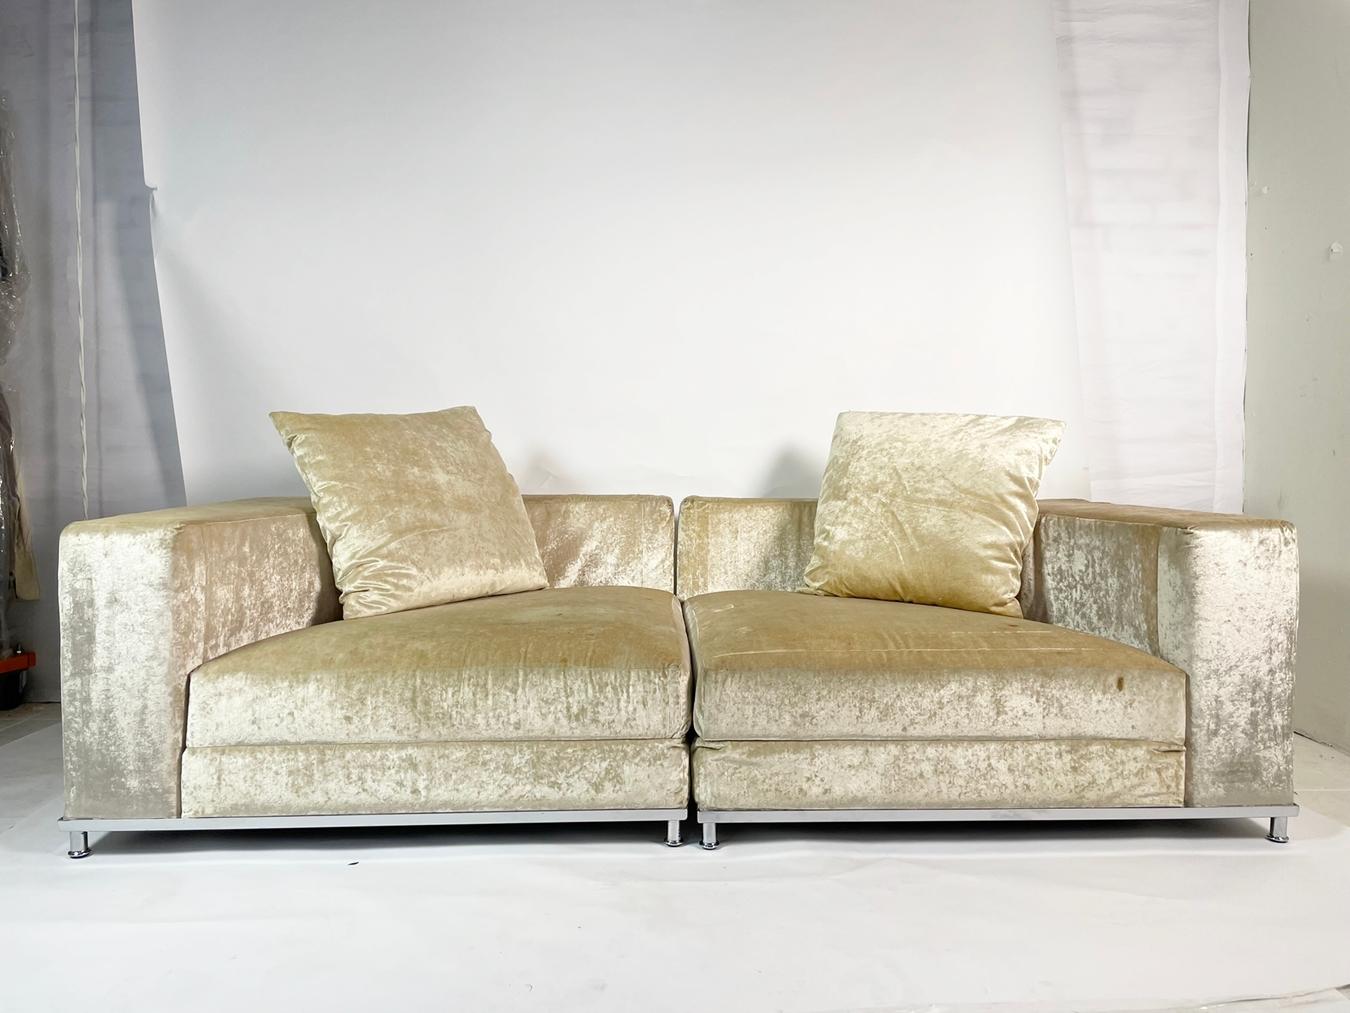 2 Piece Sectional Sofa made in Italy by Saba Italia In Fair Condition For Sale In Los Angeles, CA